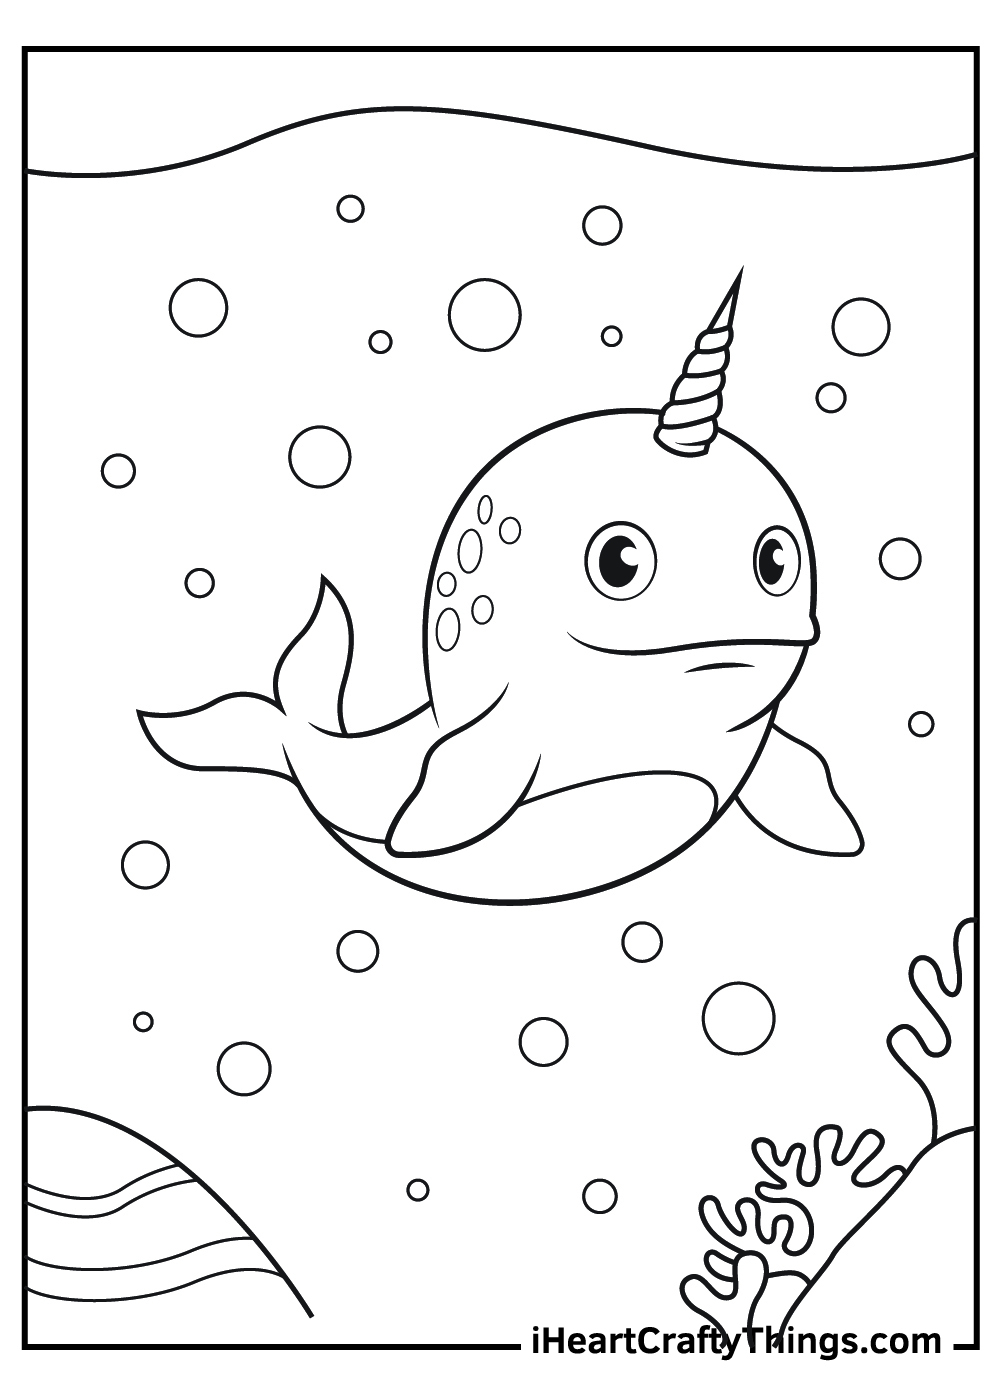 Narwhal coloring pages free printables